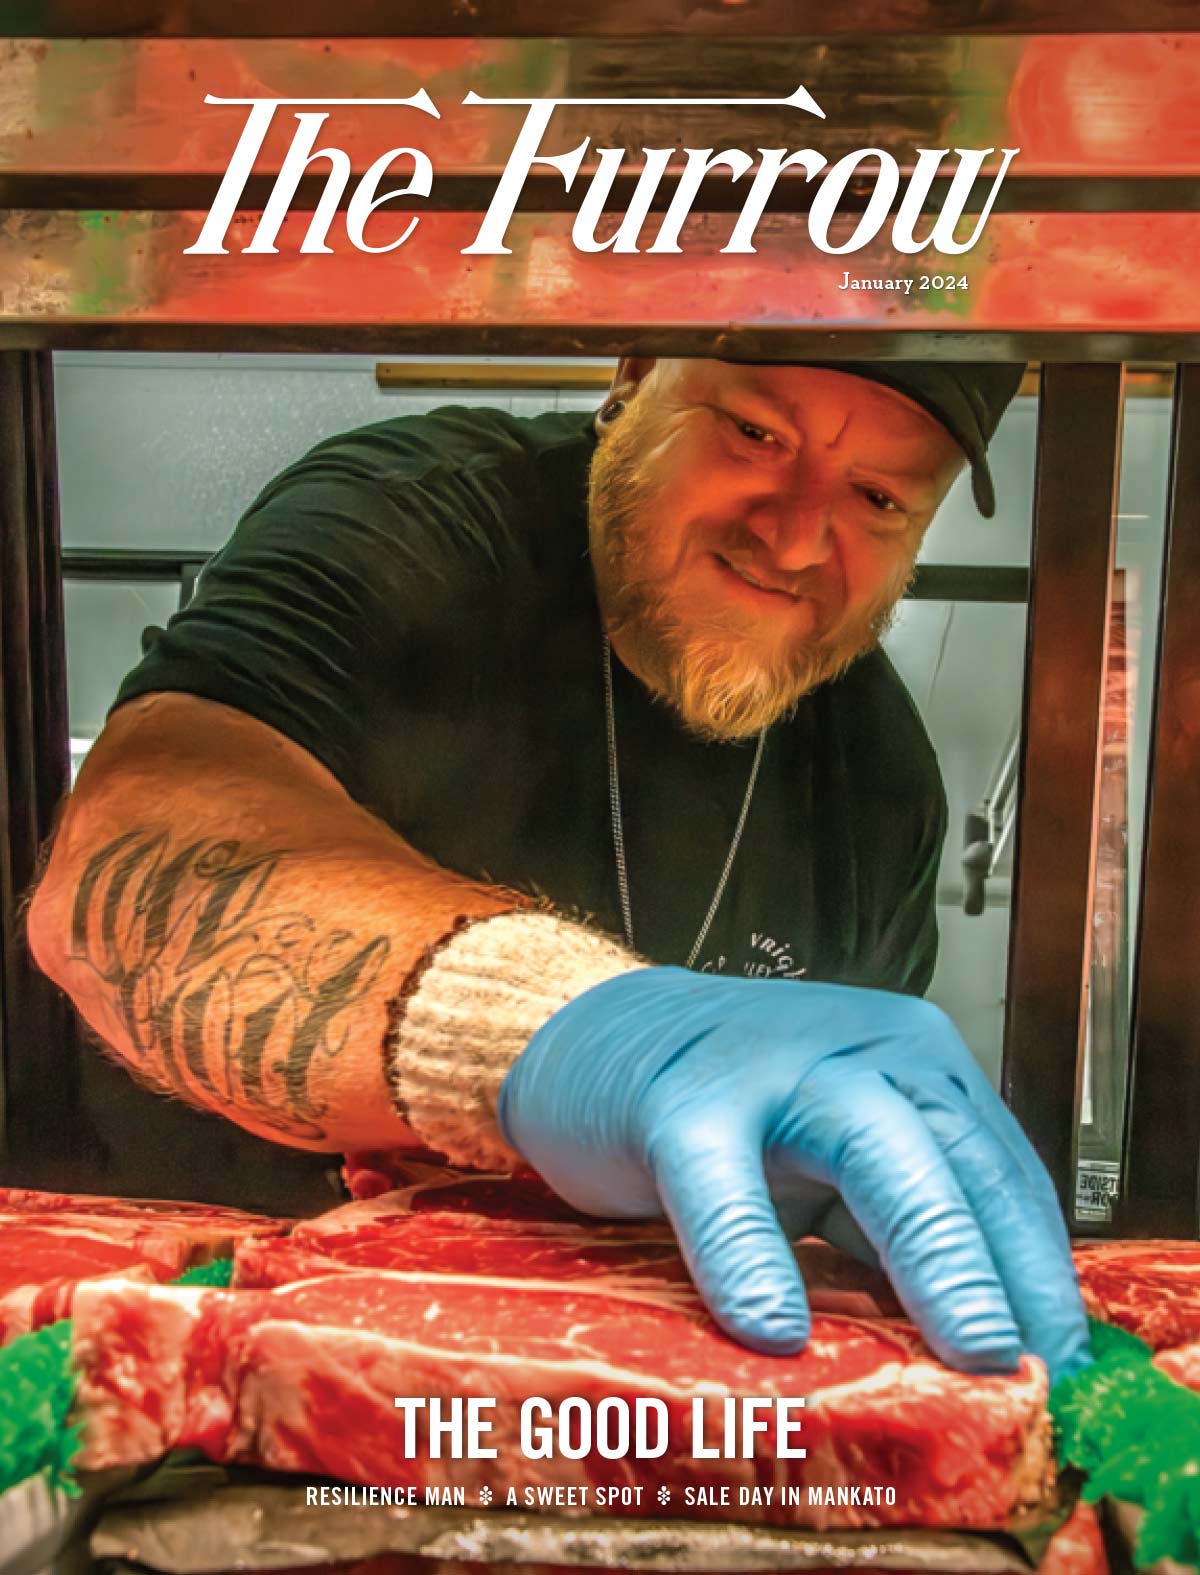 a chef with tattooed arm and light blue latex glove on inspecting a steak